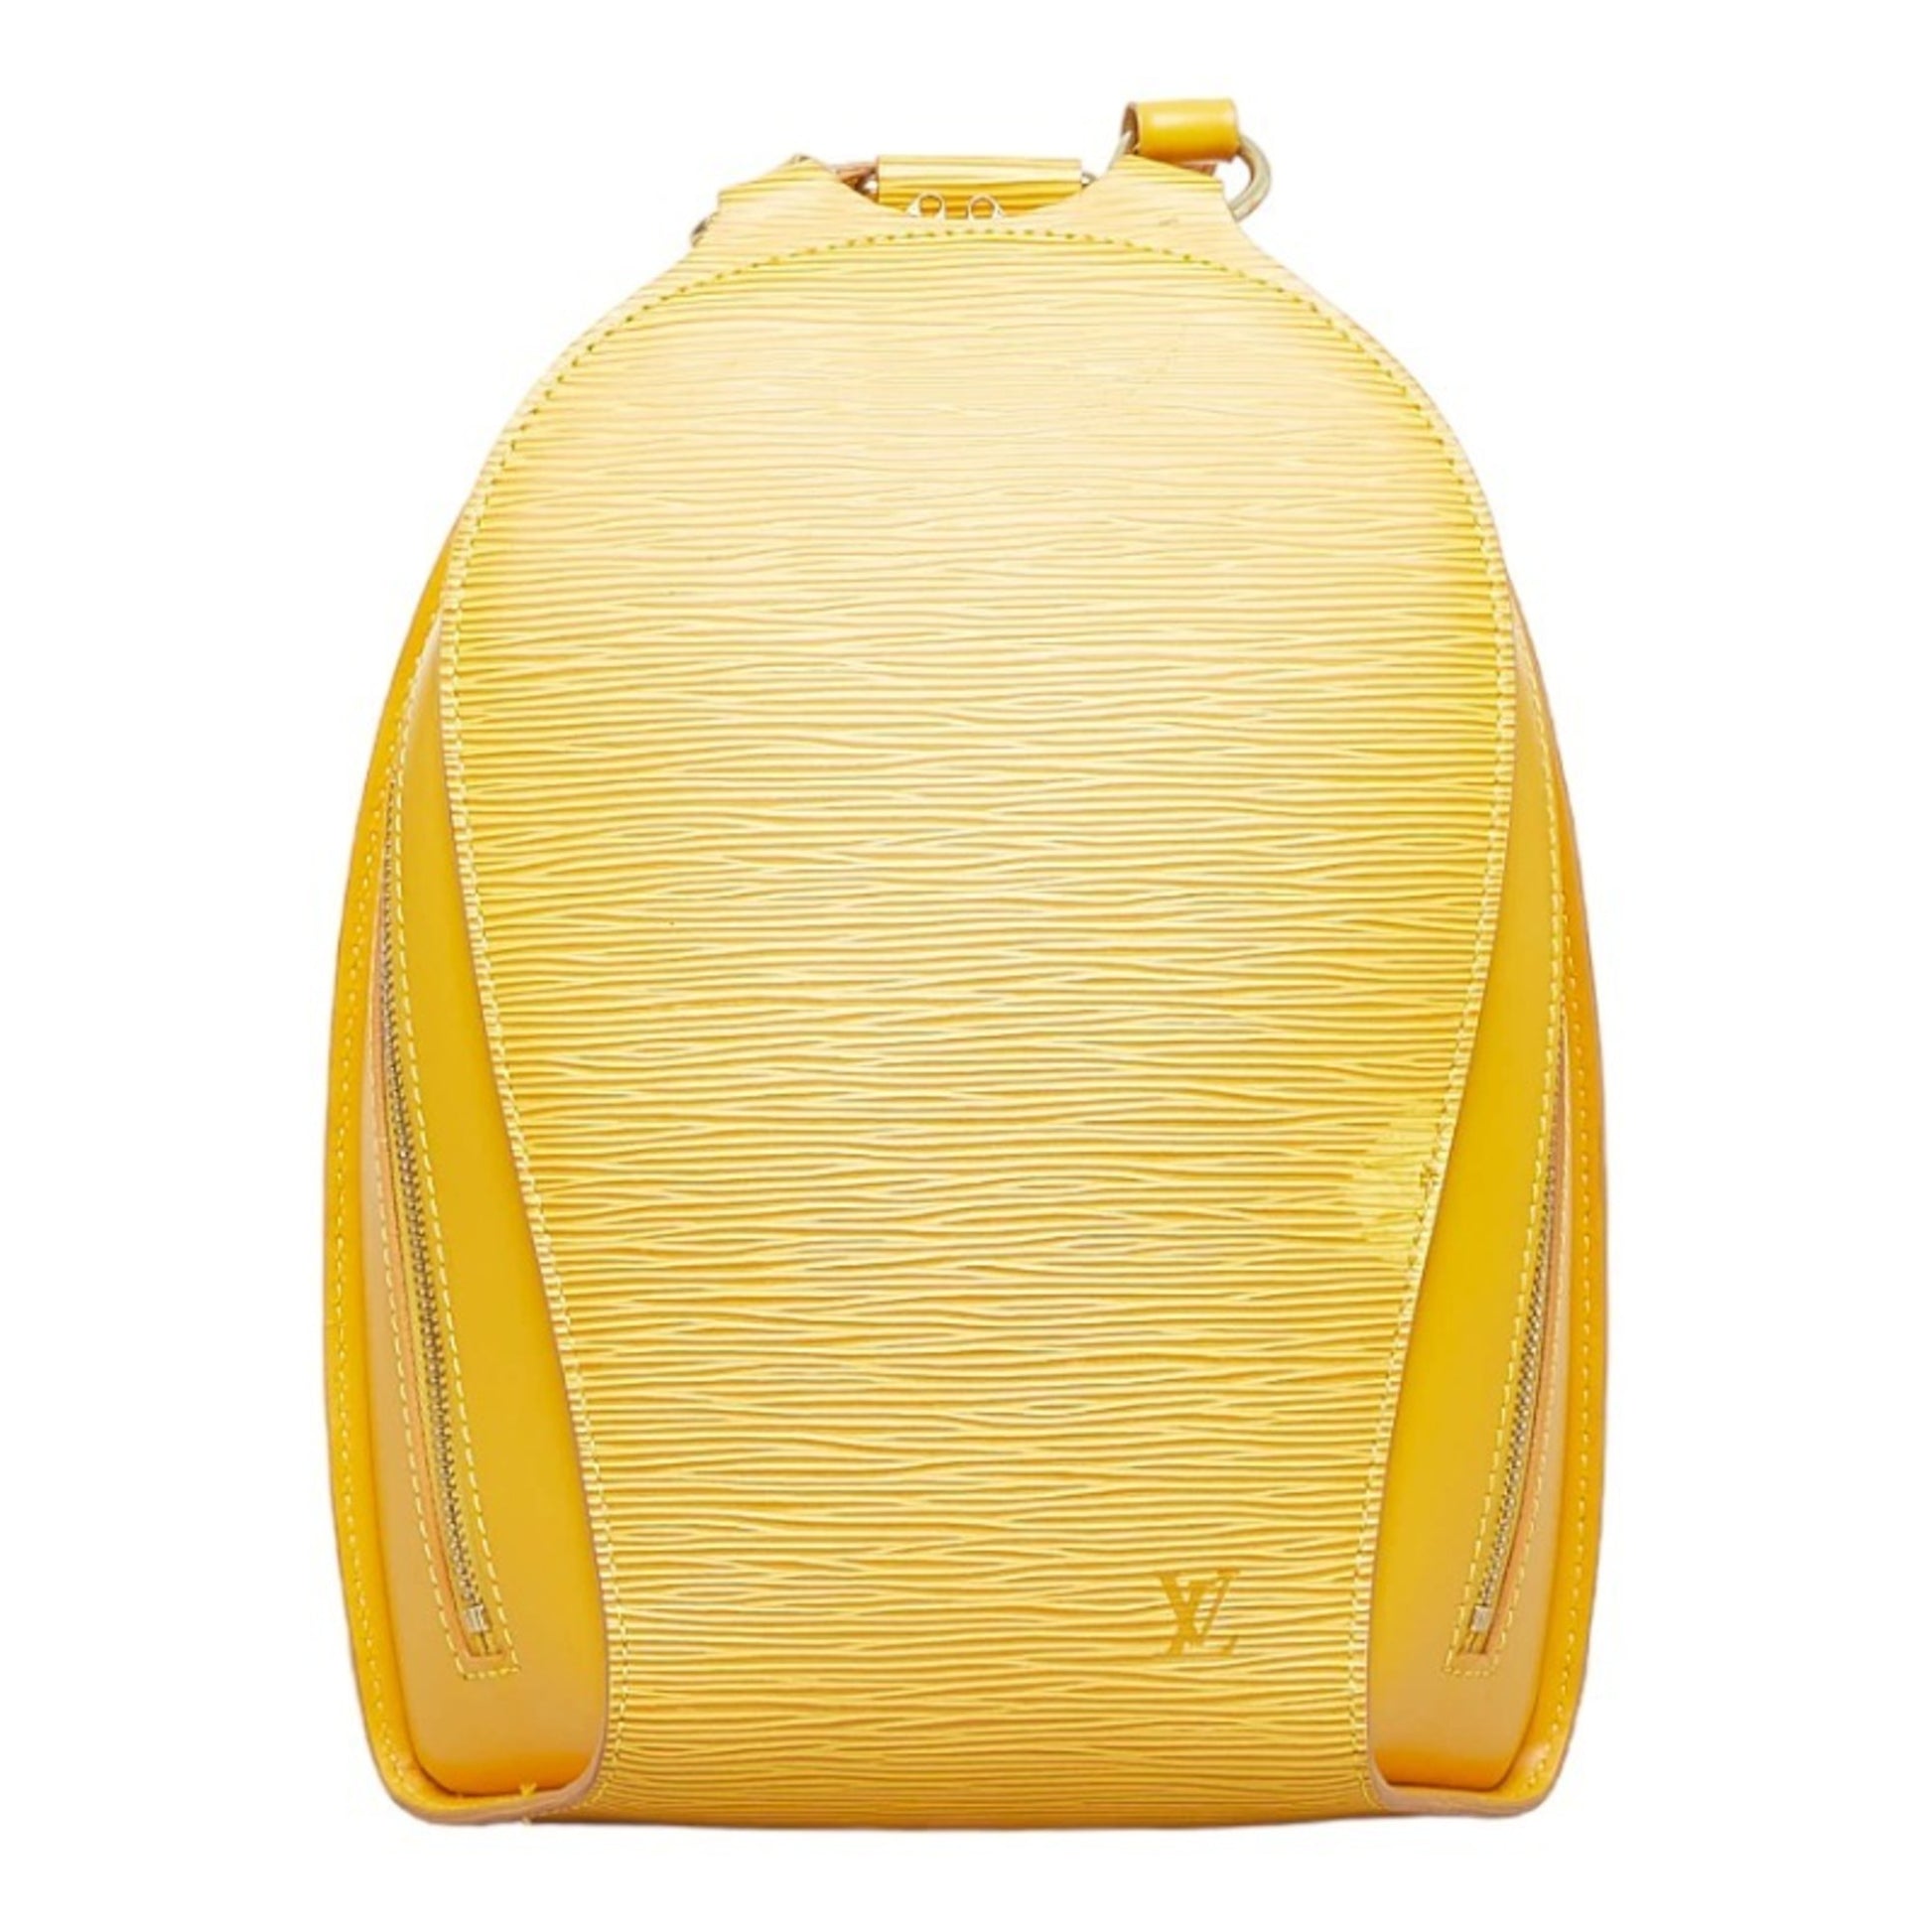 LOUIS VUITTON Epi Mabillon Backpack M52239 Tassili Yellow Leather Wome